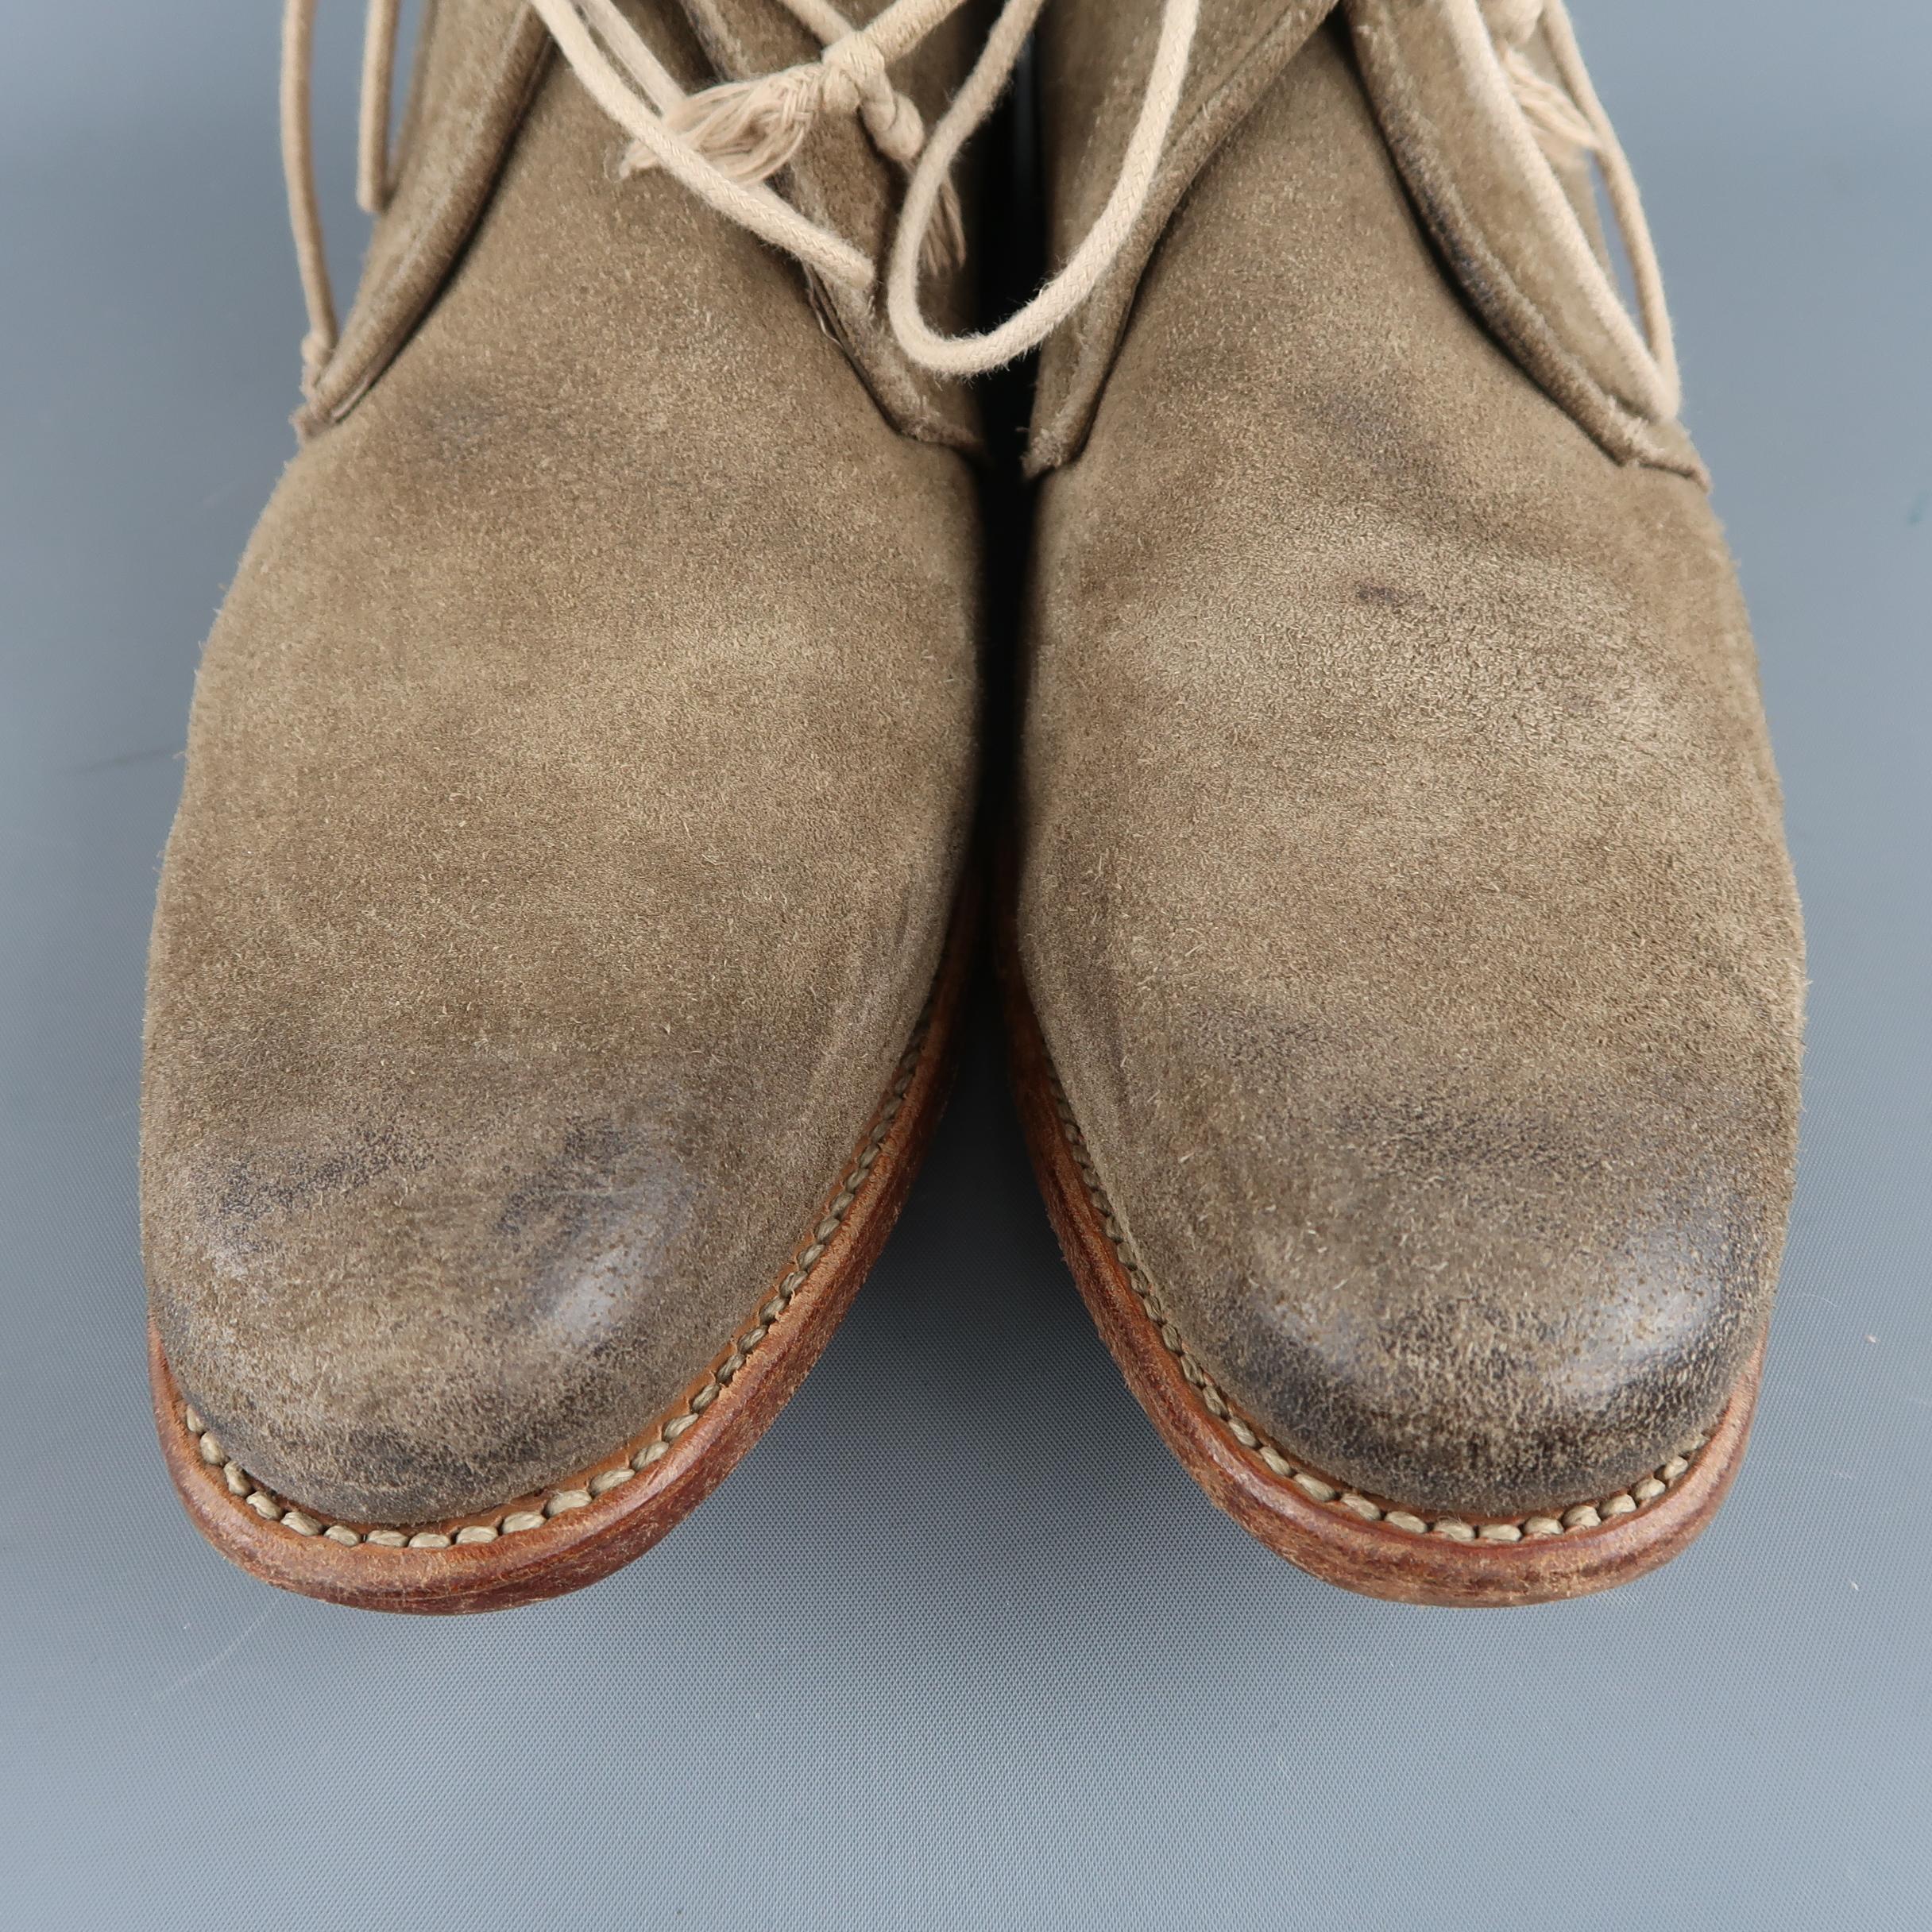 N.D.C. chukka ankle boots come in distressed beige suede with a rounded pointed toe, ace up front, and tan sole. Made in EU.
 
Very Good Pre-Owned Condition.
Marked: IT 43
 
Measurements:
 
Length: 13 in.
Width: 4 in.
Height: 4 in.